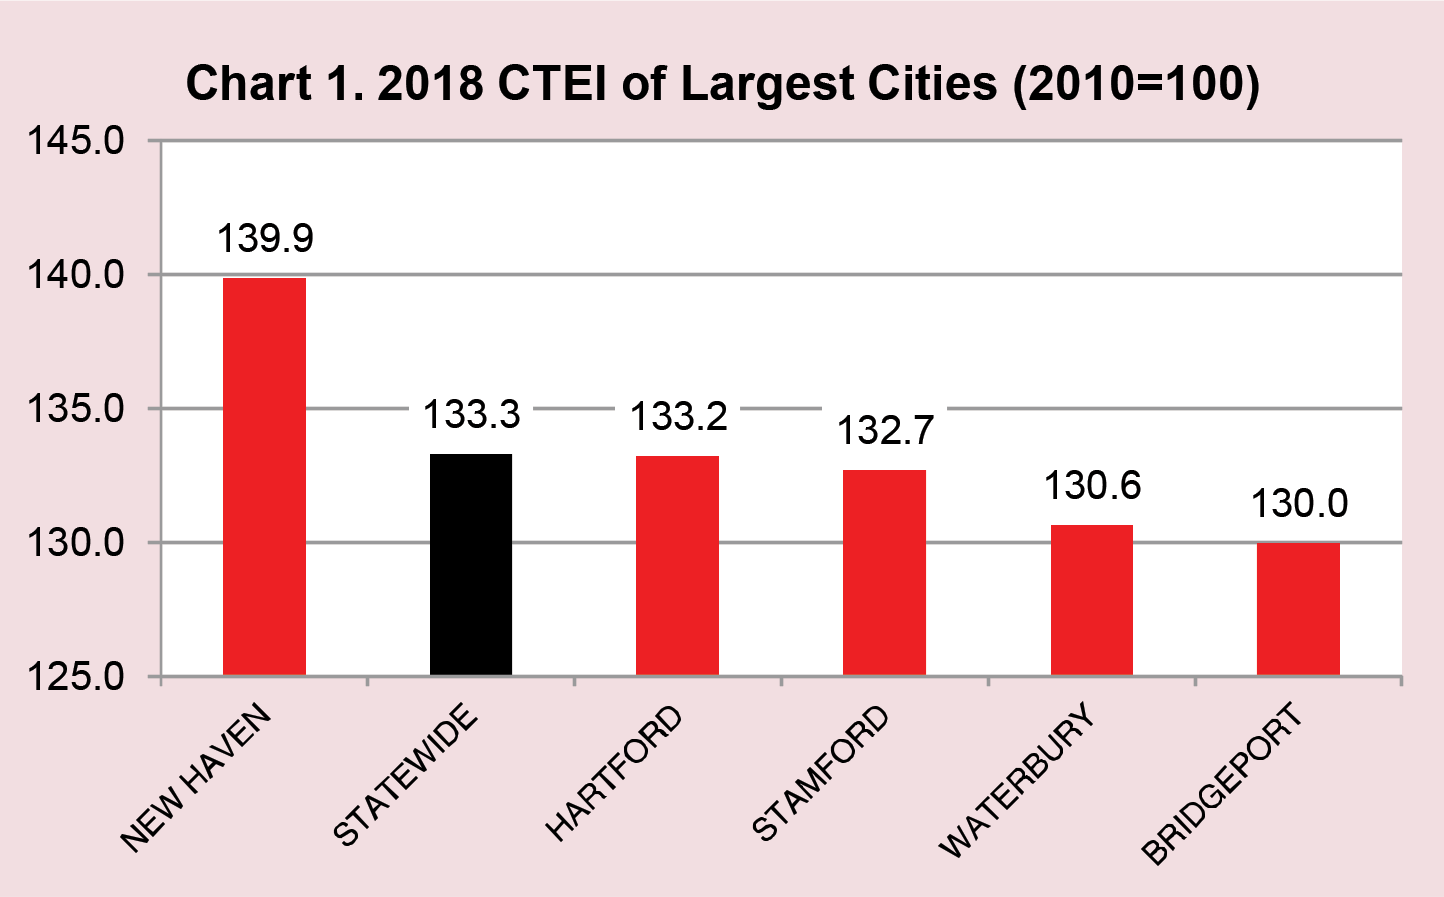 Chart 1. 2018 CTEI of Largest Cities (2010=100)